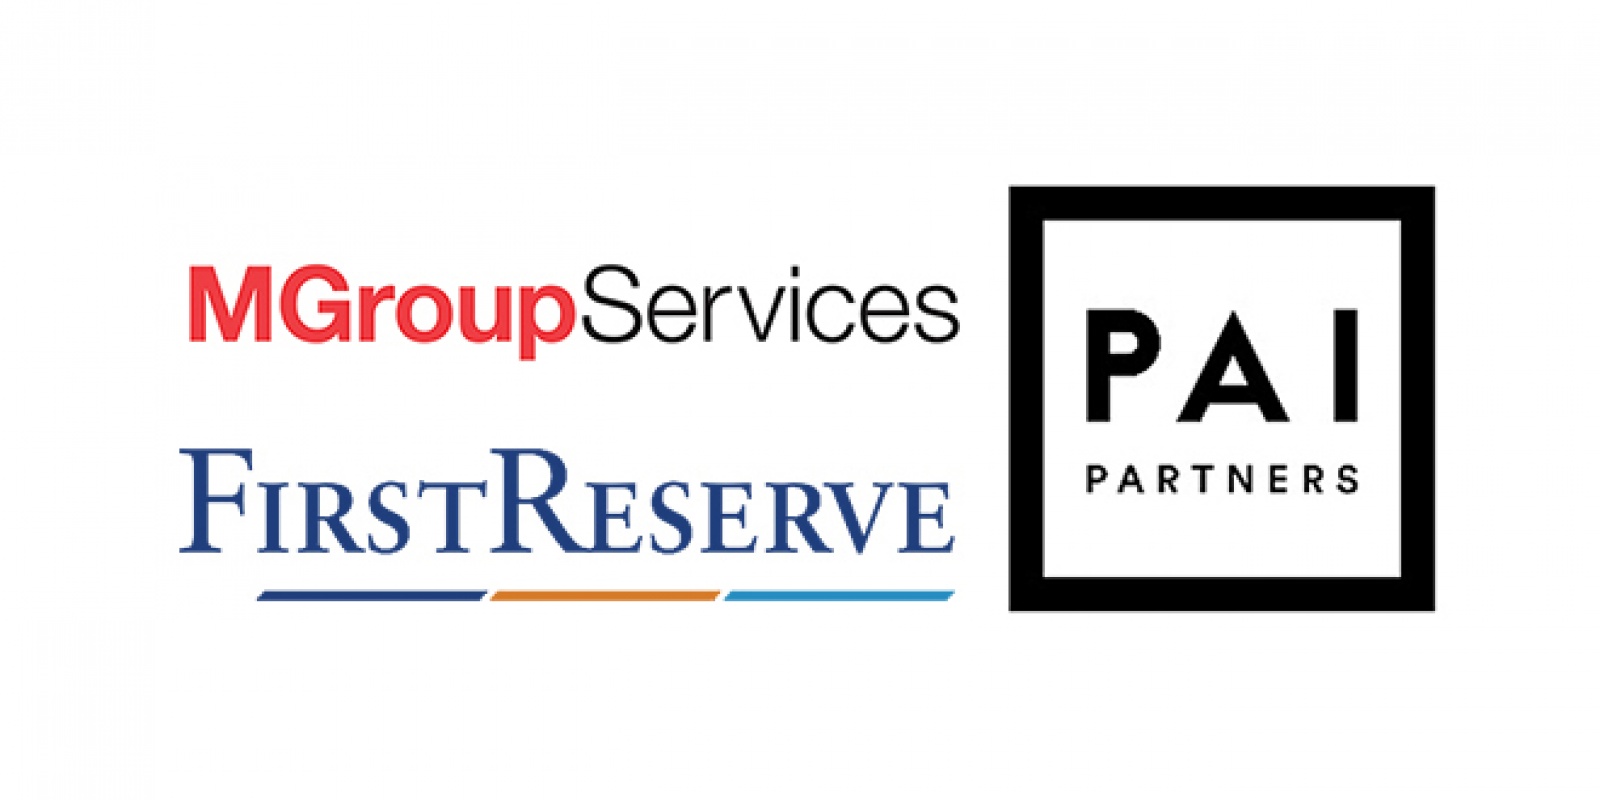 PAI Partners Acquires M Group Services from First Reserve